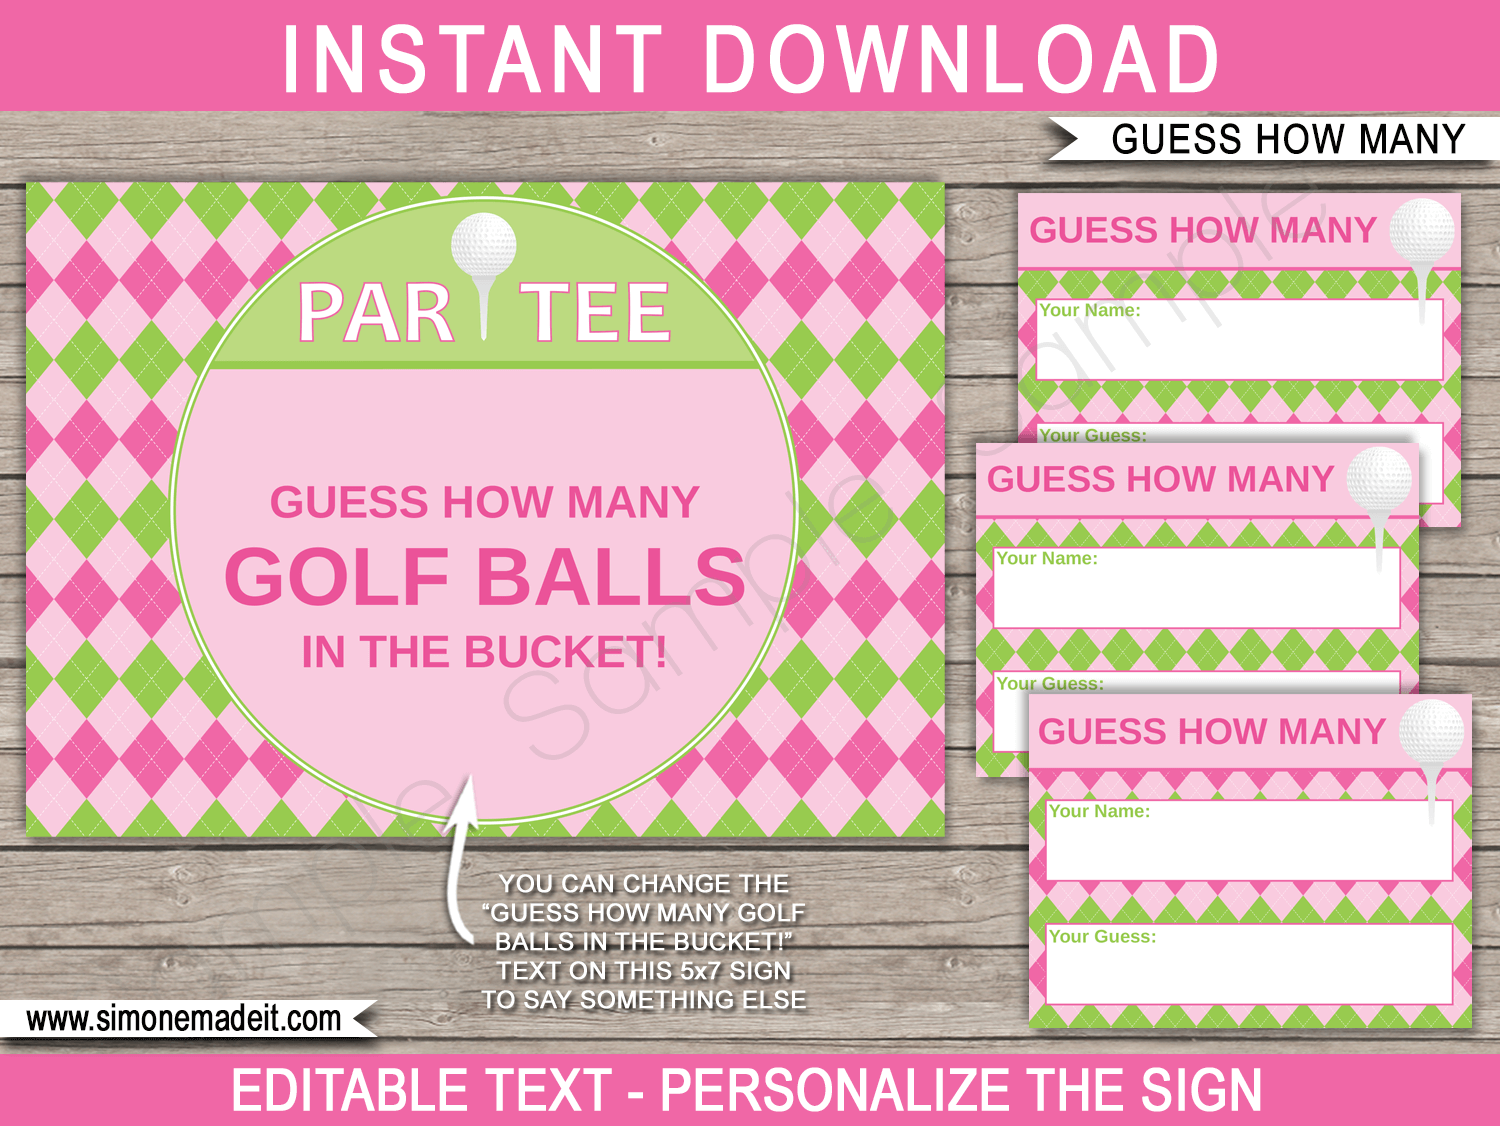 Printable Ladies Golf Party Guess How Many Game Template | Retirement or Birthday Party Games | DIY Editable Text |  $3.00 INSTANT DOWNLOAD via simonemadeit.com